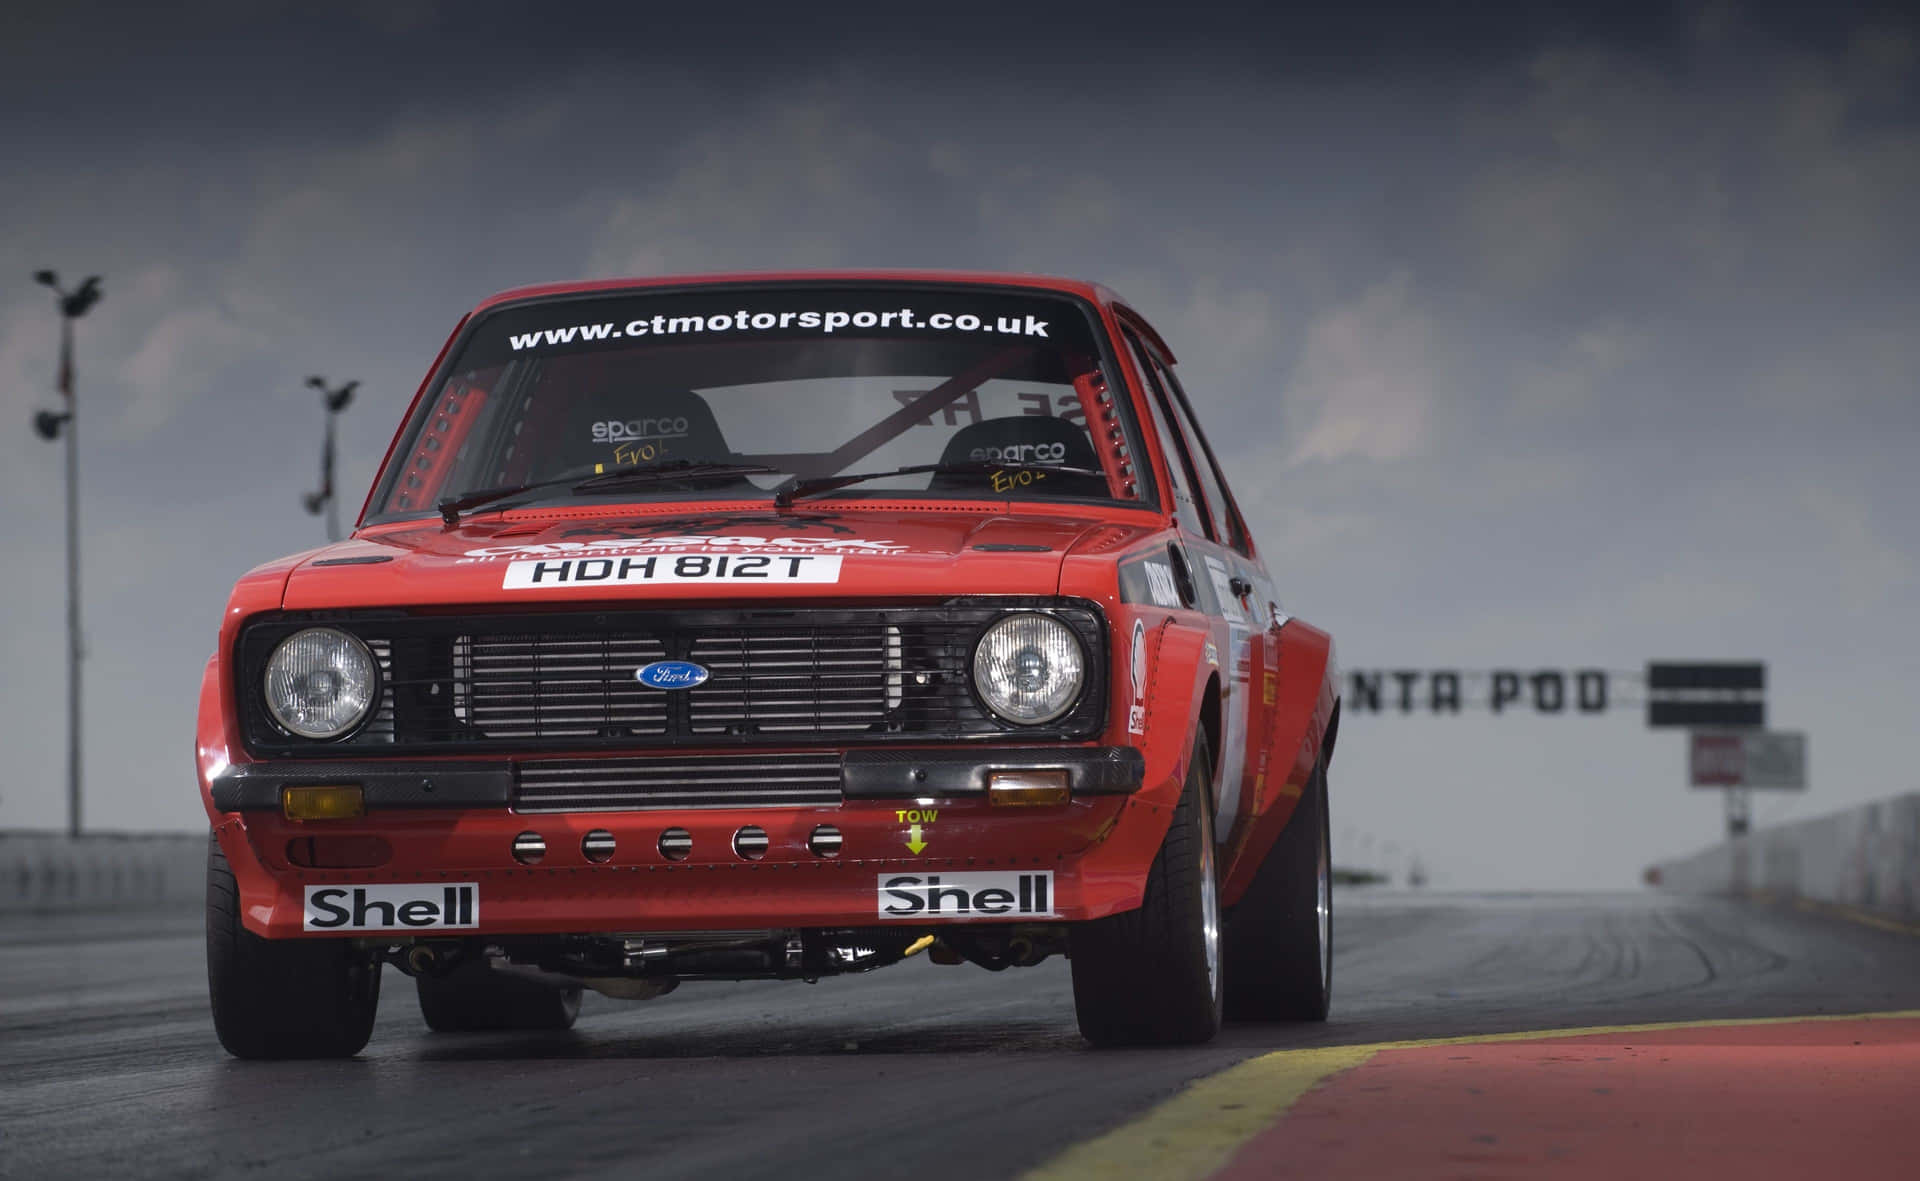 Captivating Ford Escort in Action Wallpaper